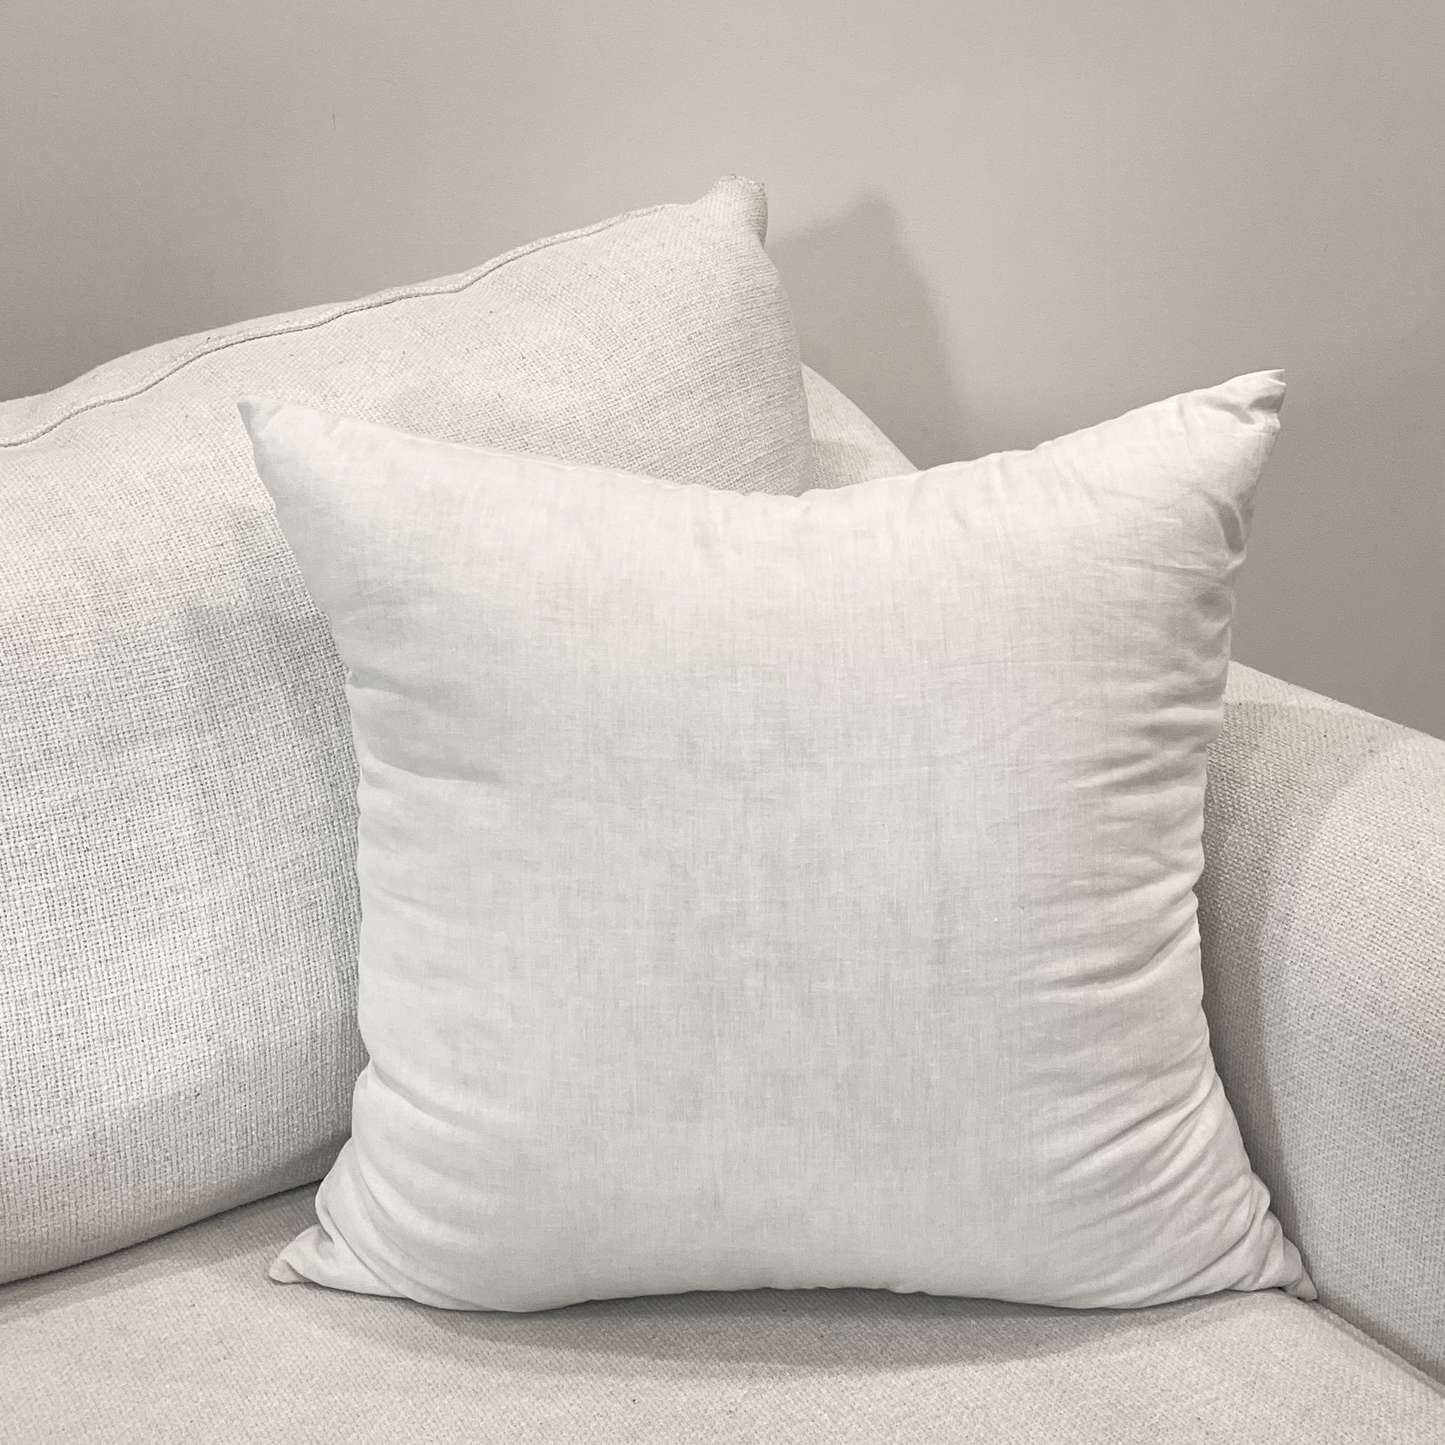 Comfortable and Soft Cotton Decor Pillow Insert with Polyester Fill